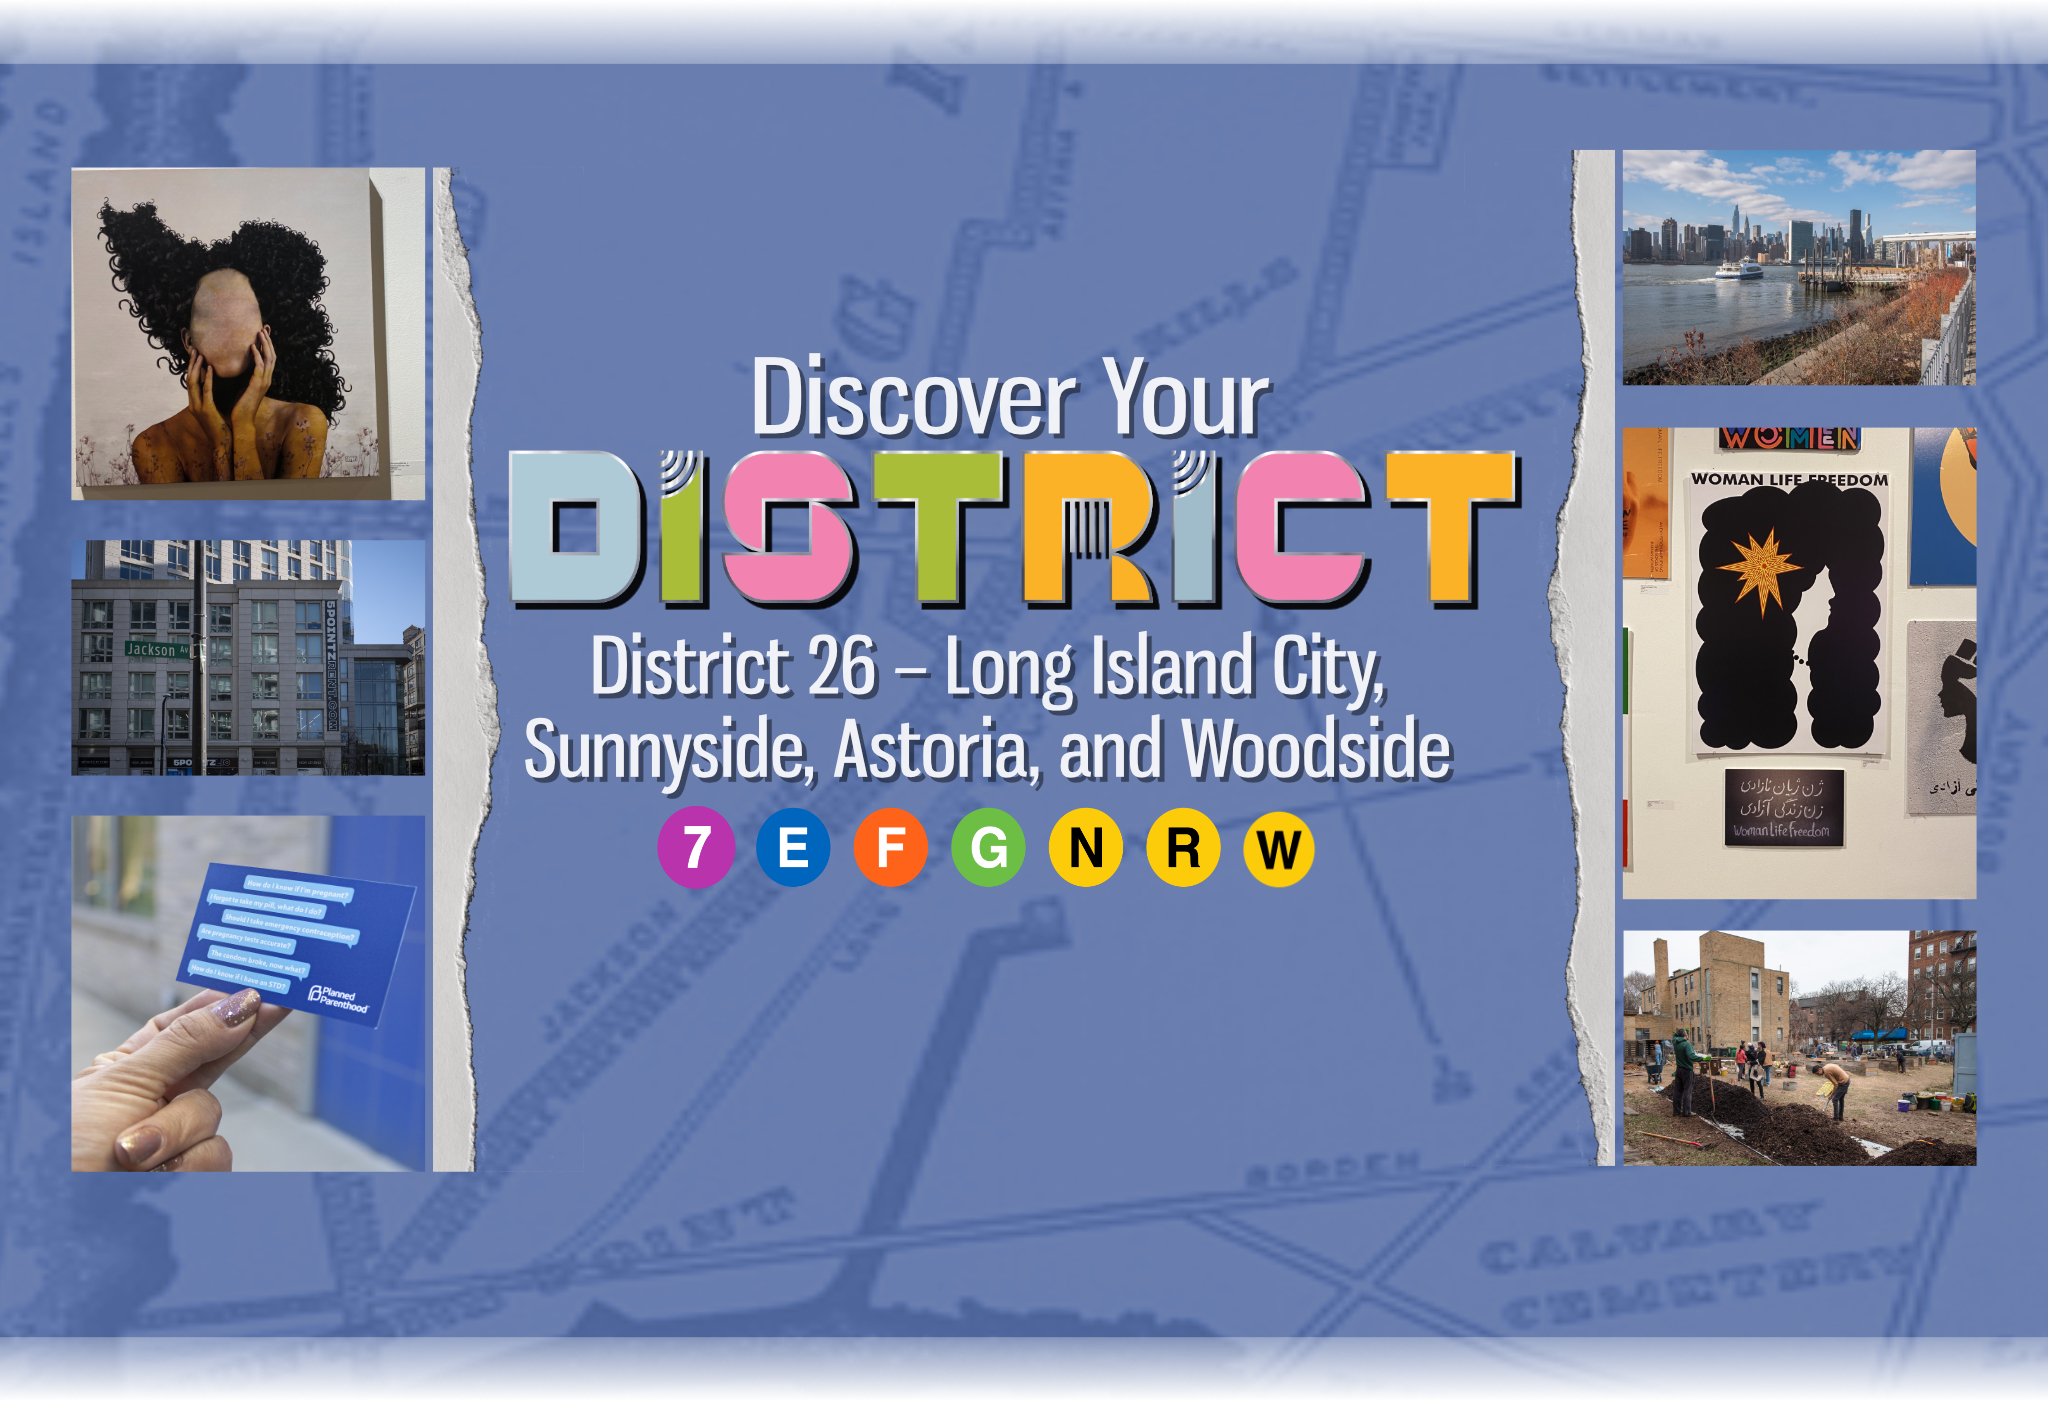 Student Booklet. Discover District 26 - Long Island City, Sunnyside, Woodside, Astoria